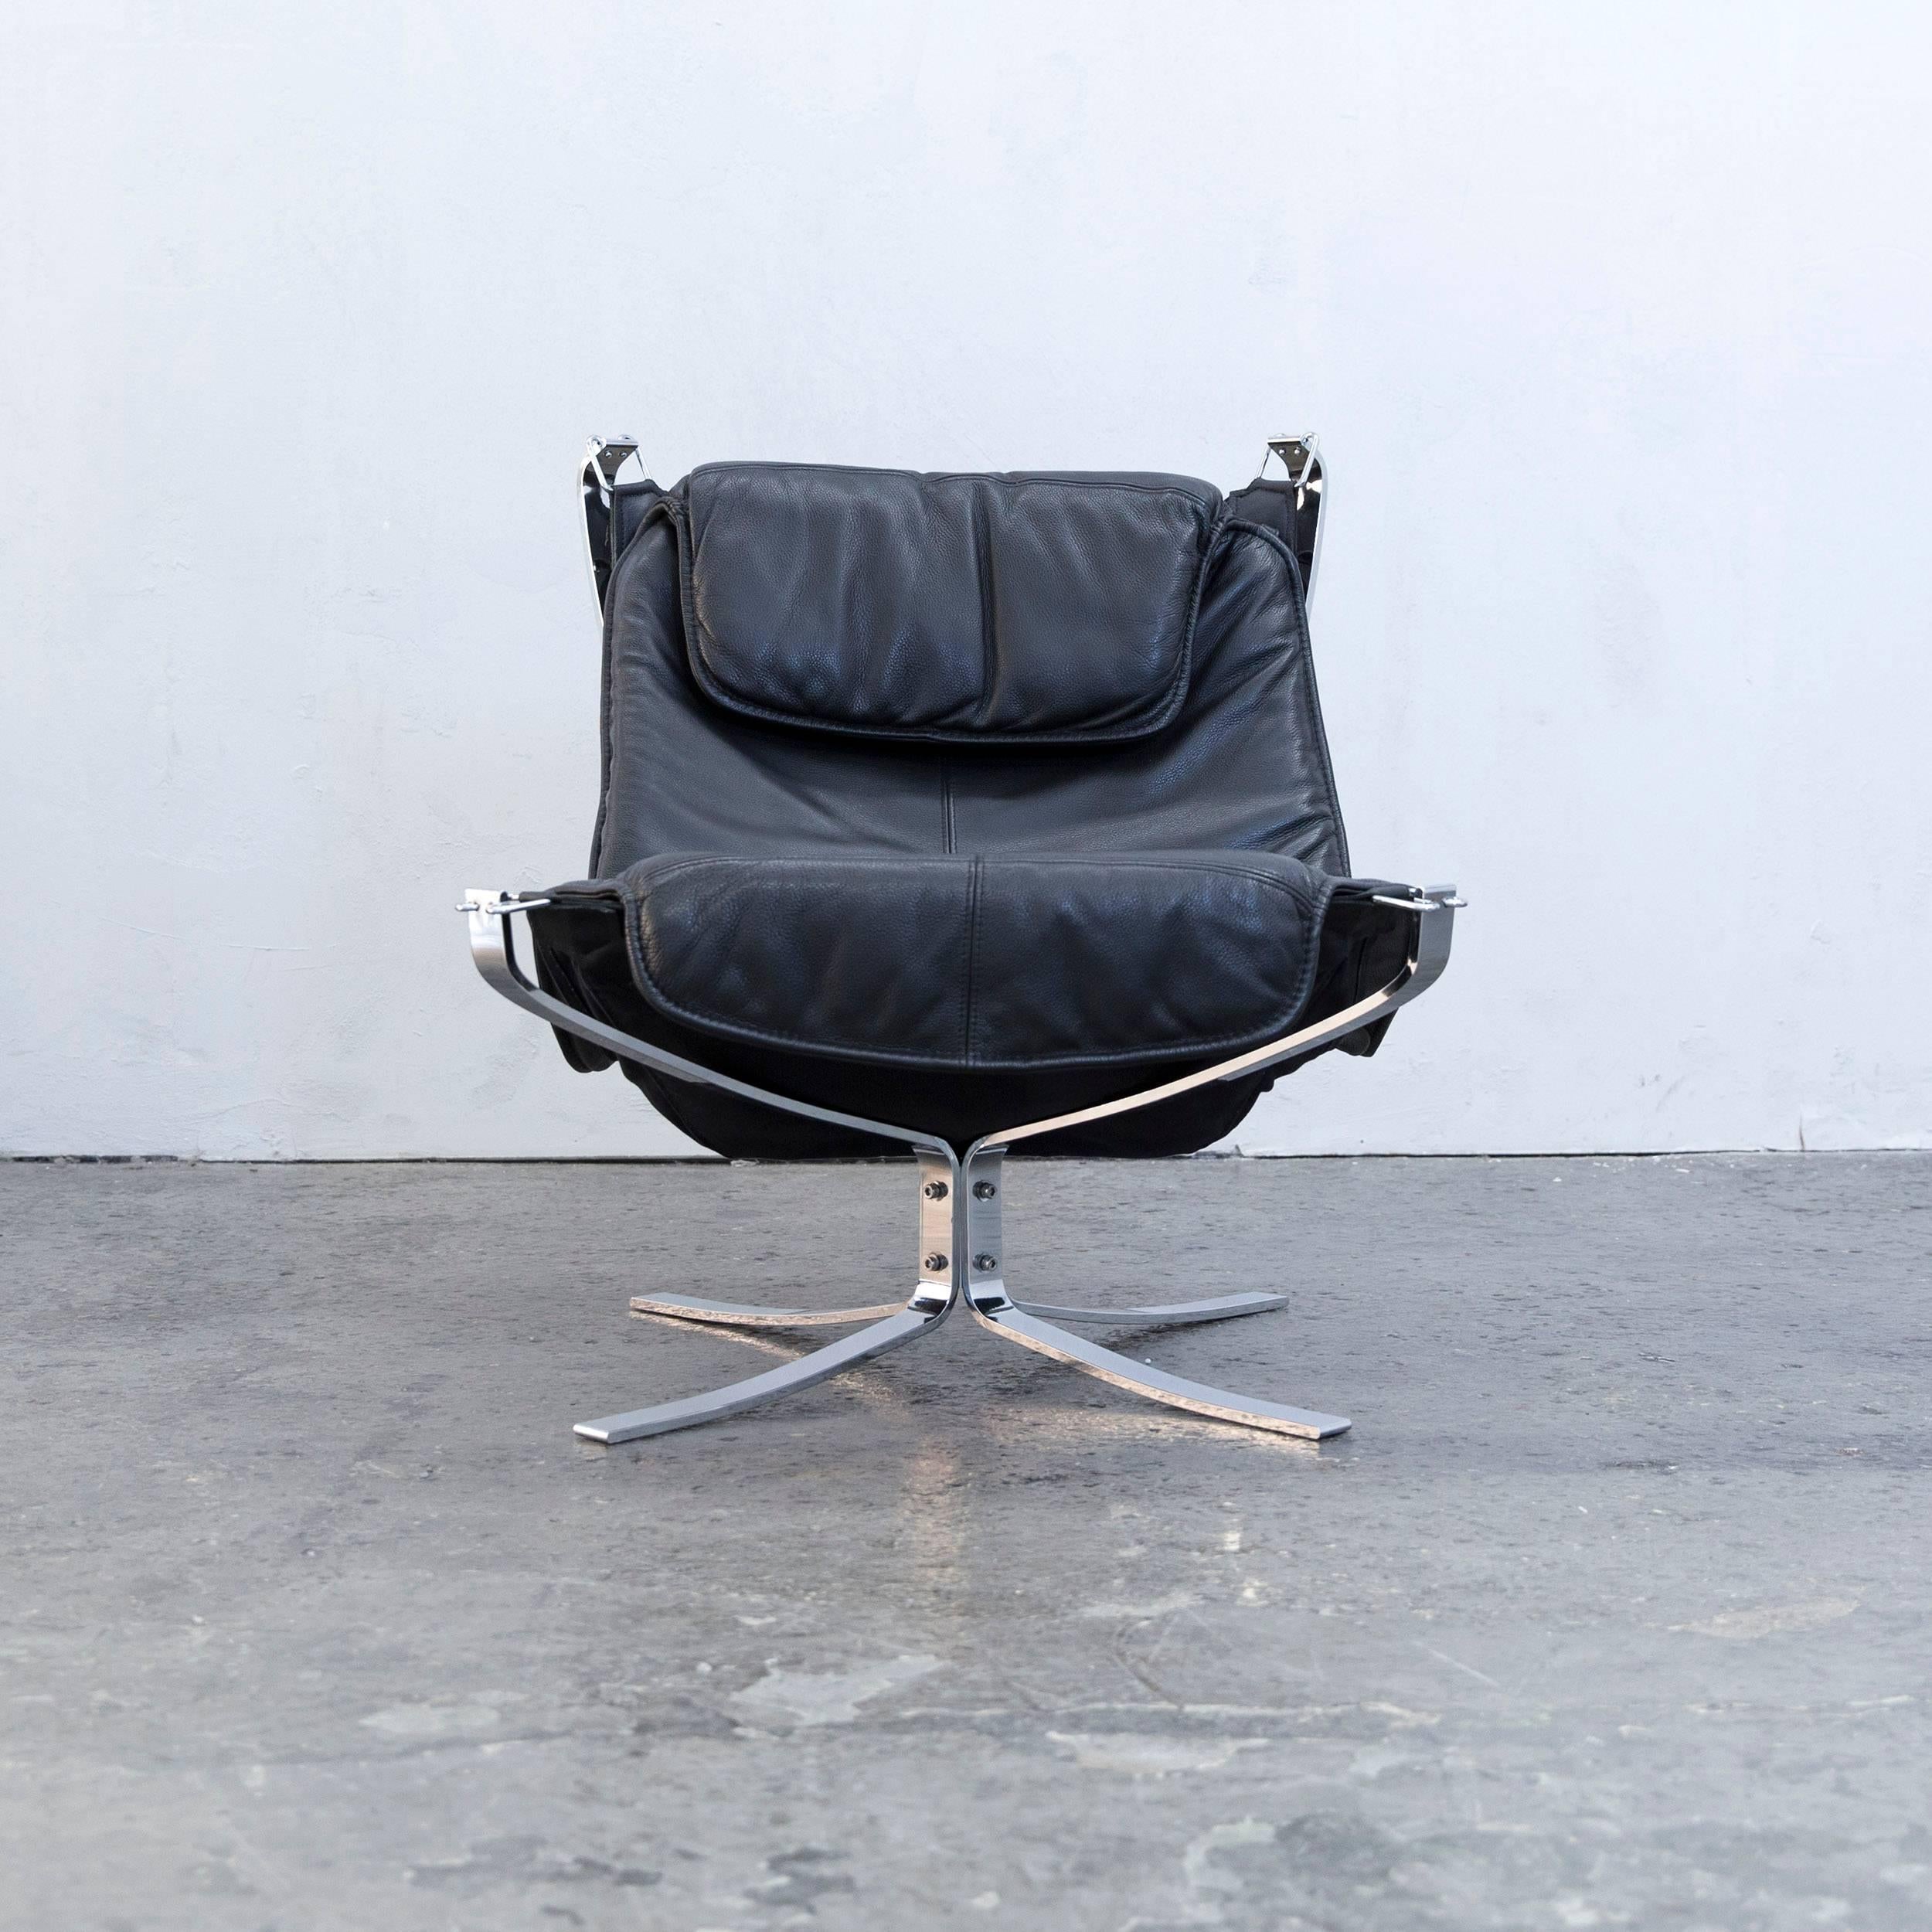 Black colored original Sigurd Resell Falcon leather chair and footstool in a minimalistic and modern design, made for pure comfort and style.